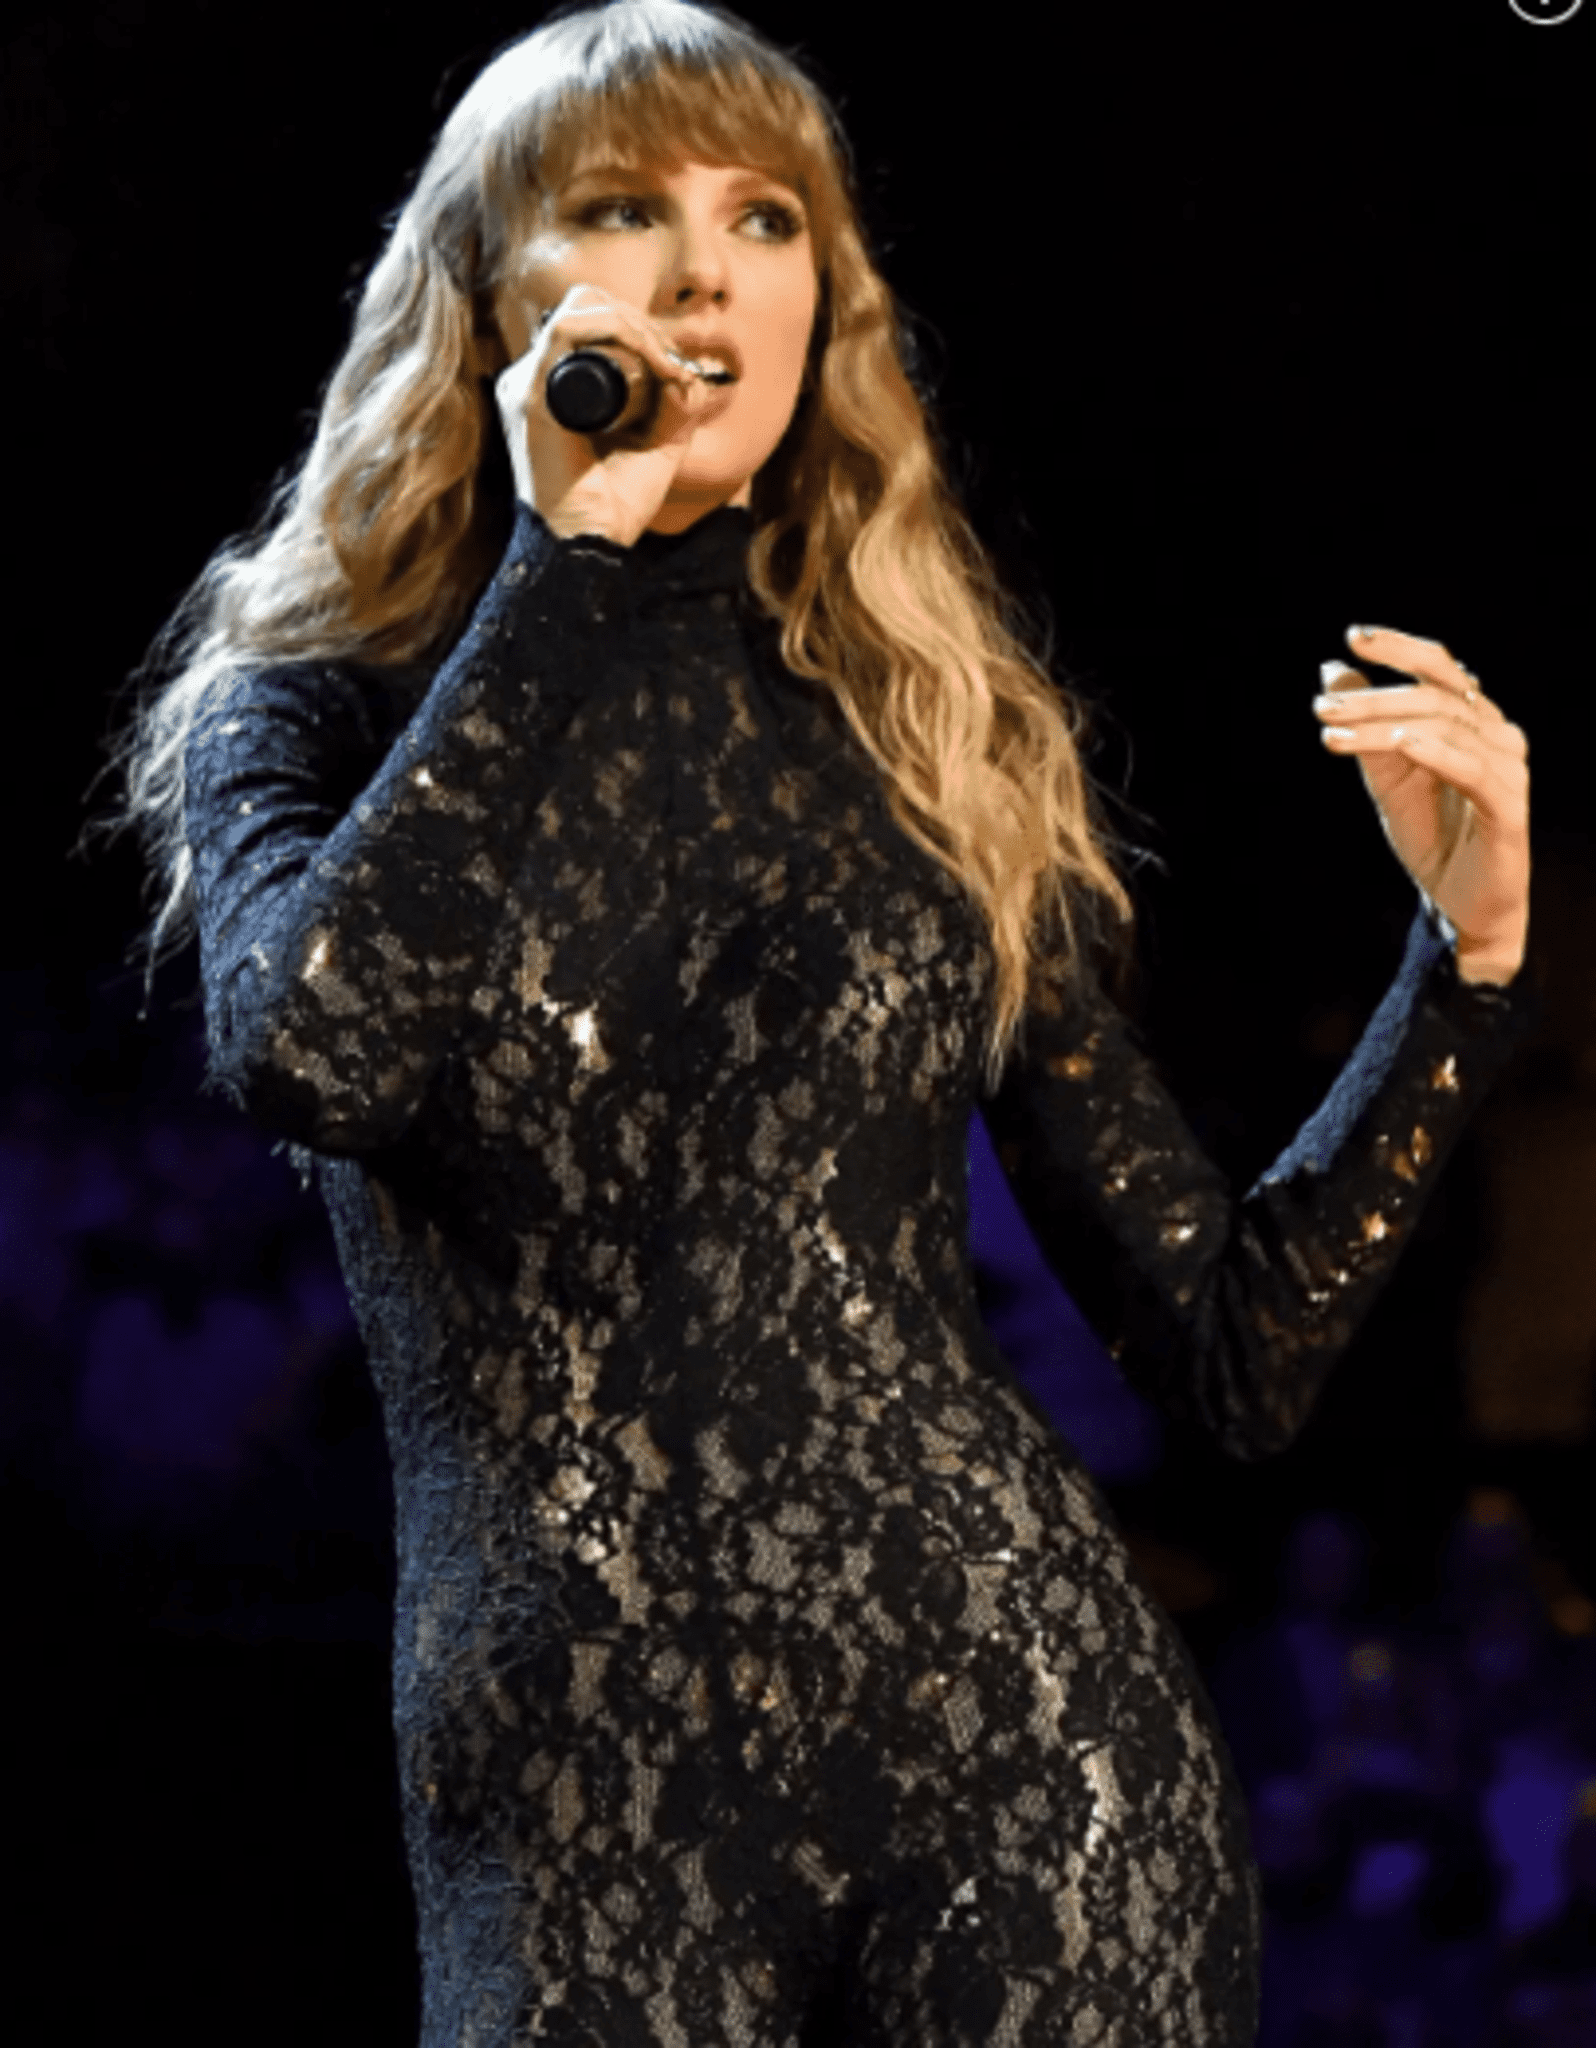 The following summer, Taylor Swift will launch a massive stadium tour